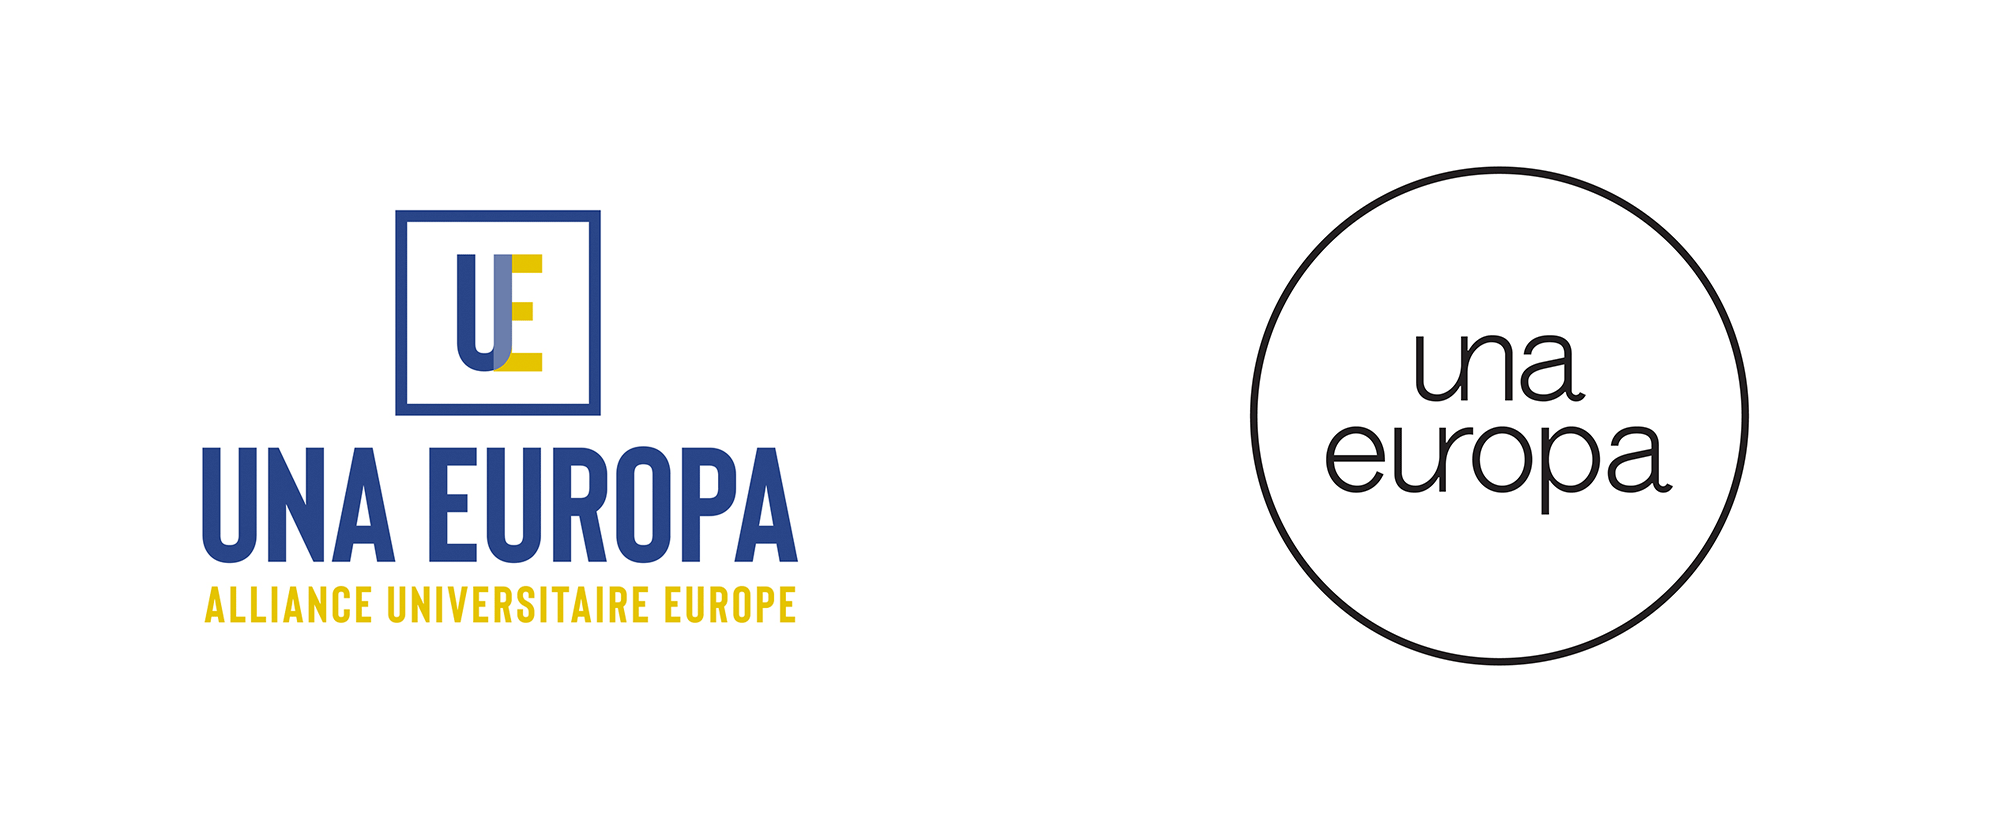 New Logo and Identity for Una Europa by Base Design